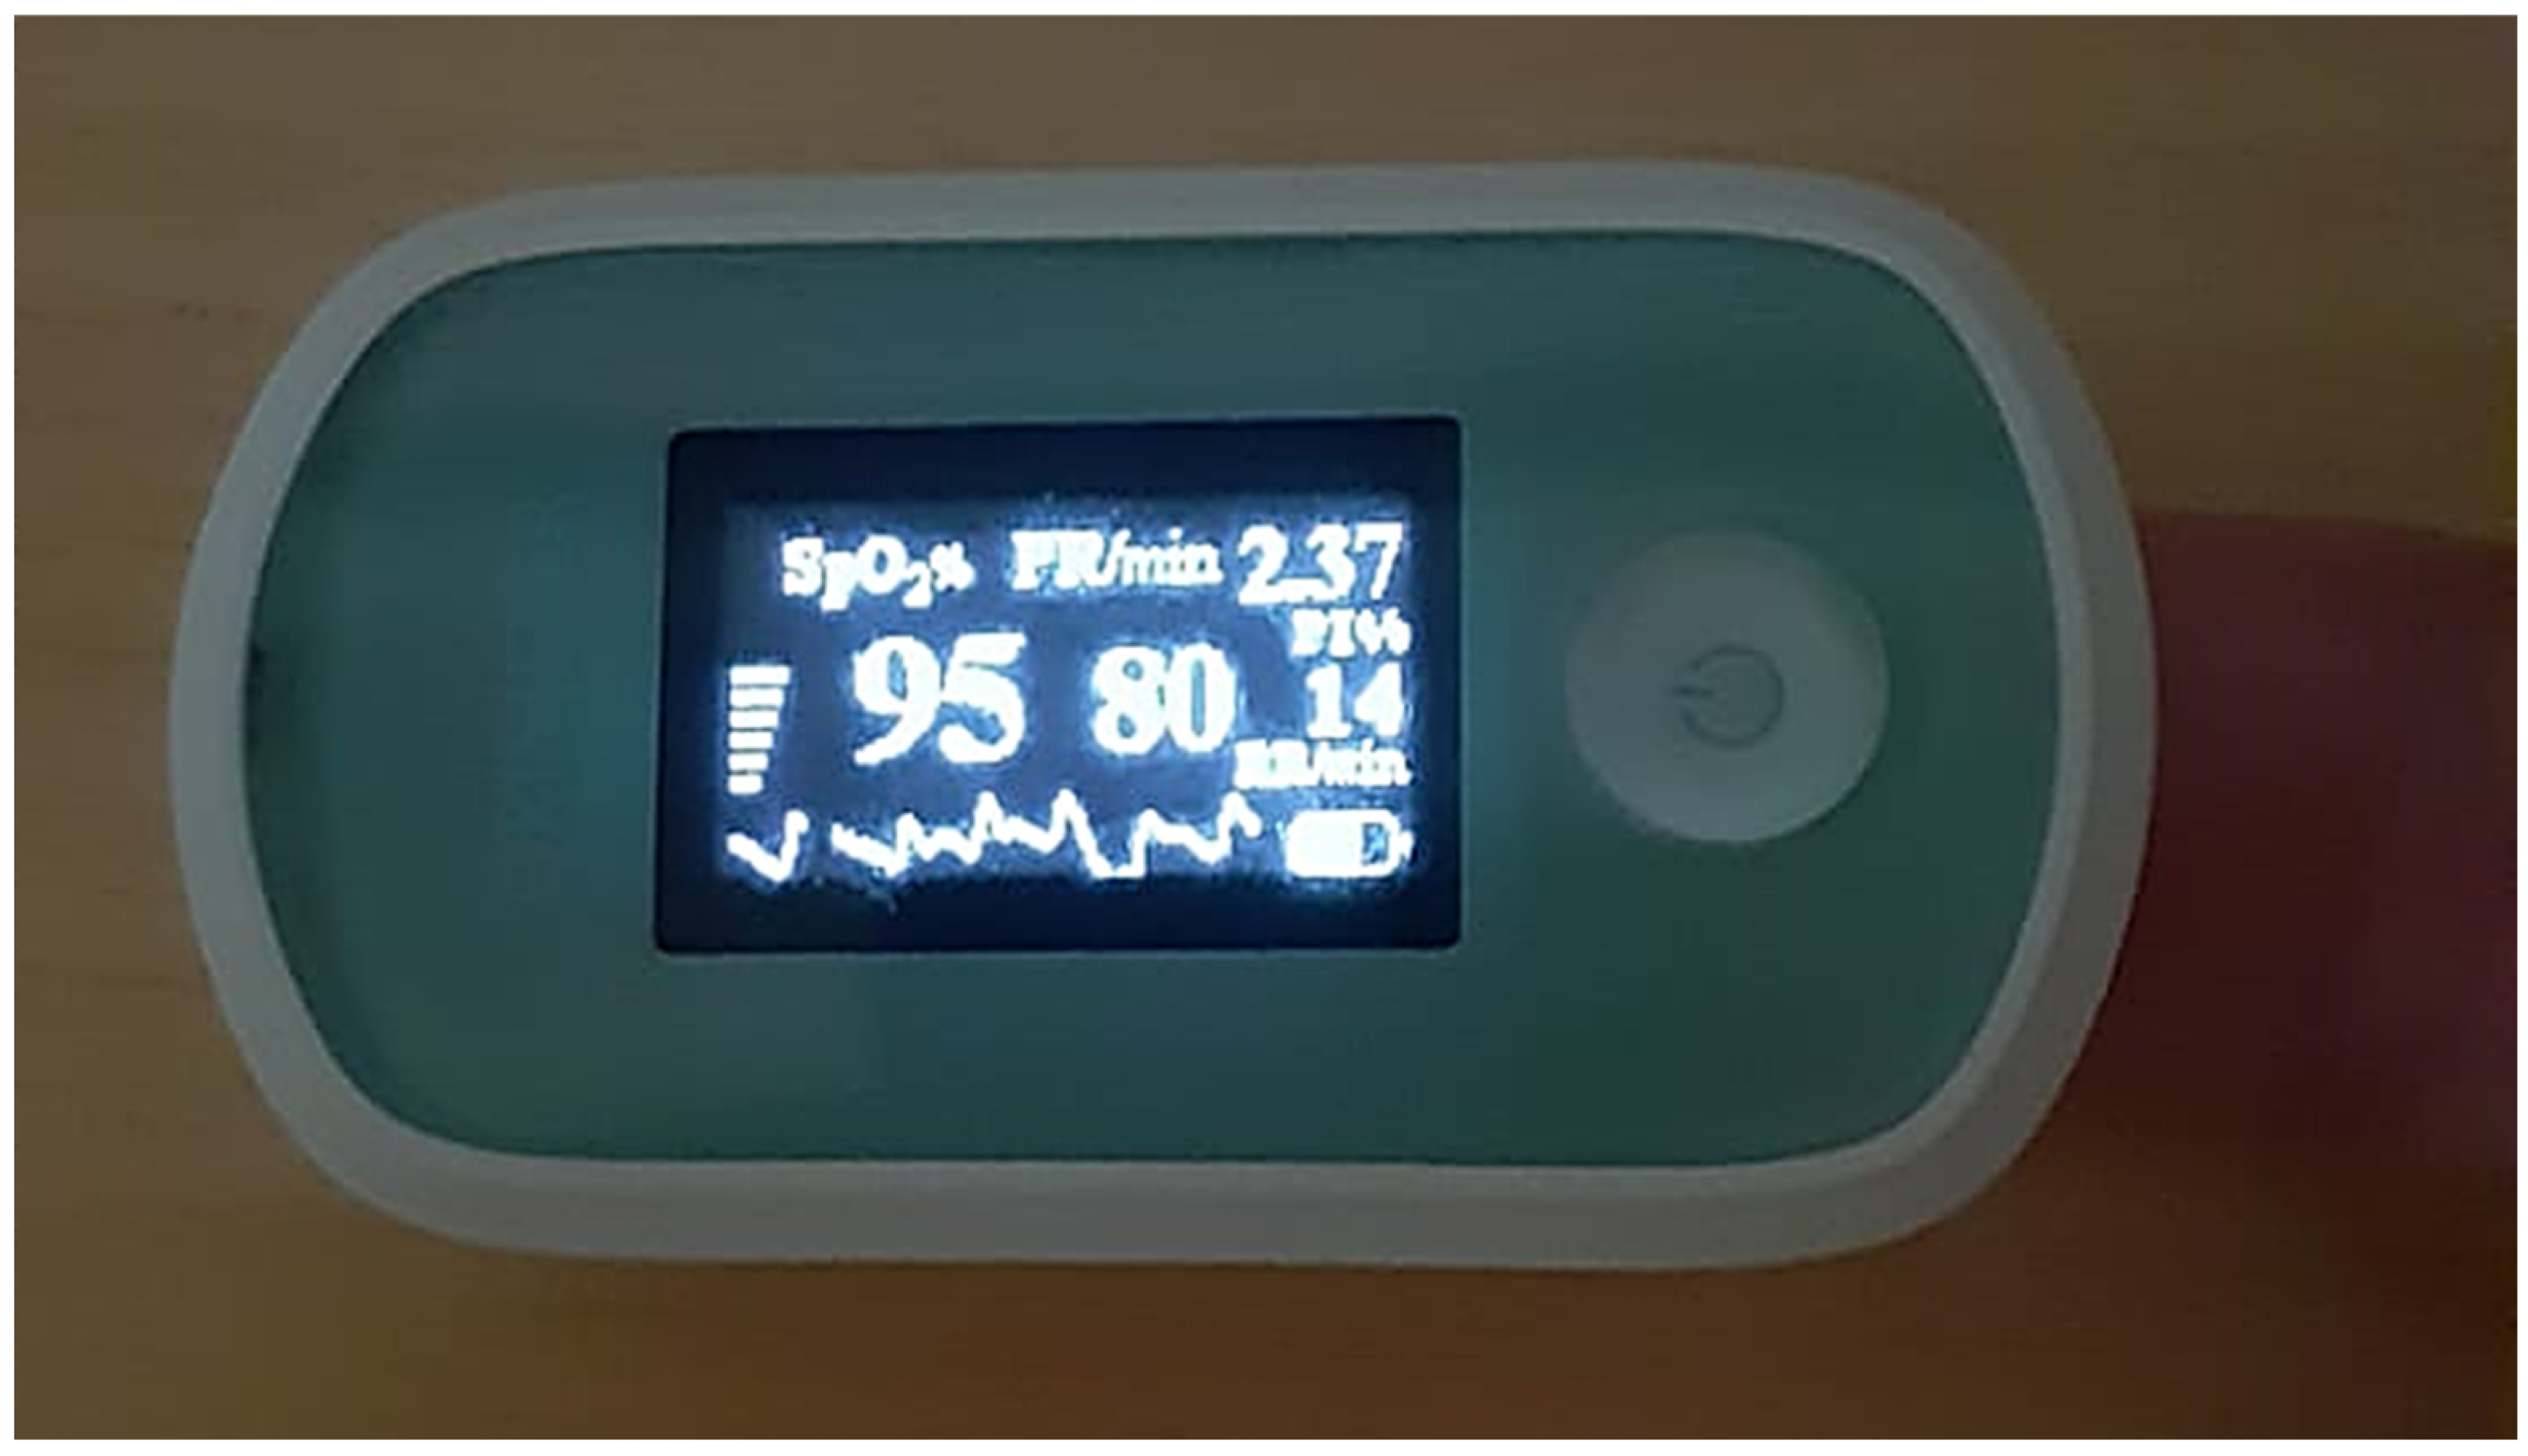 Decoding pulse oximeters: Does it provide an accurate reading